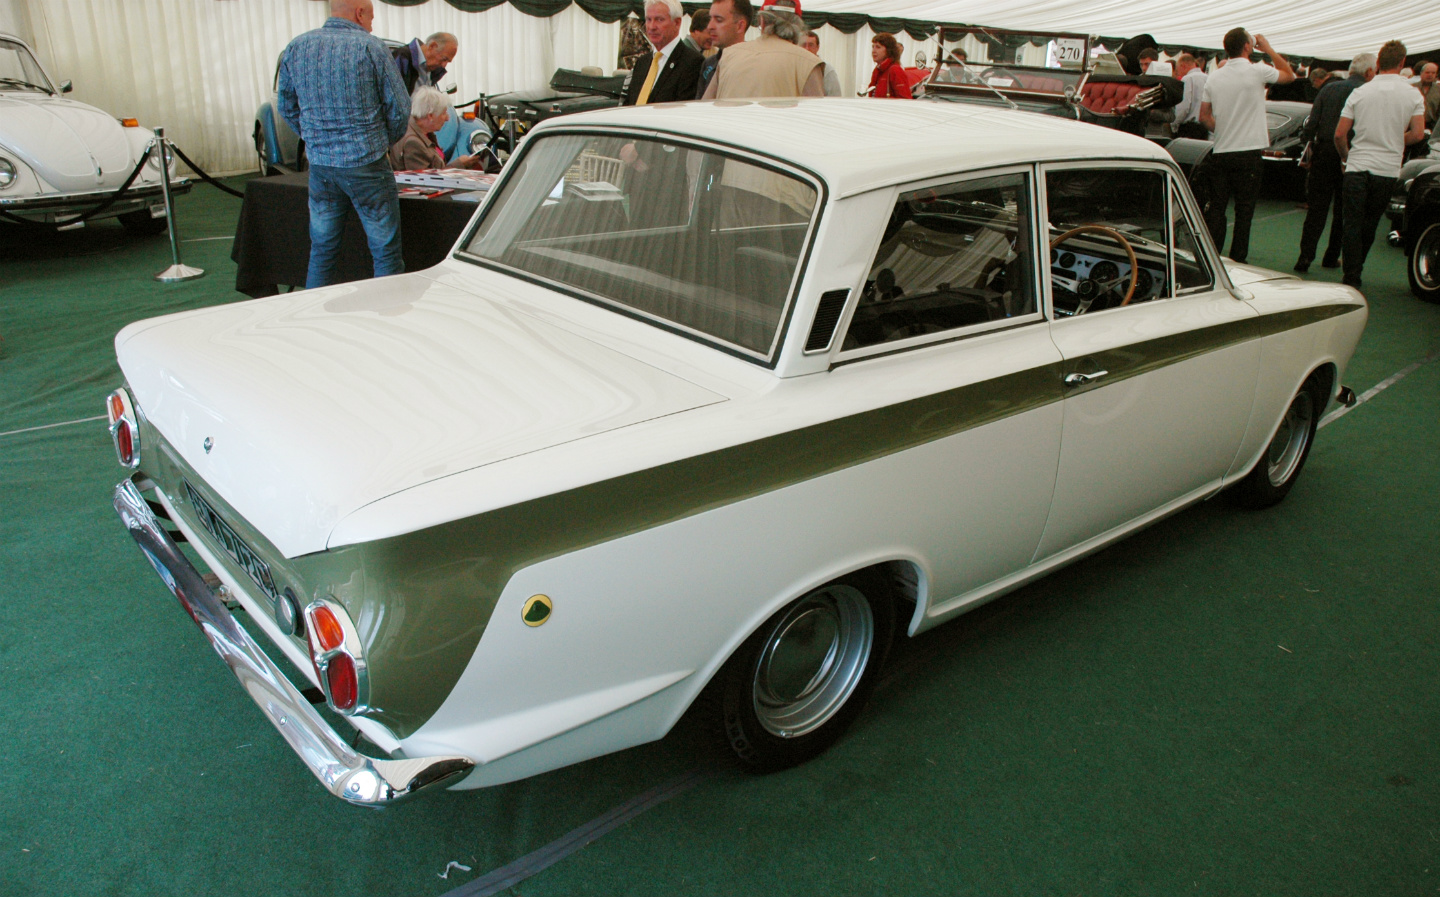 Lotus Cortina: Drive! Philip Glenister's favourite getaway cars at the London Classic Car Show